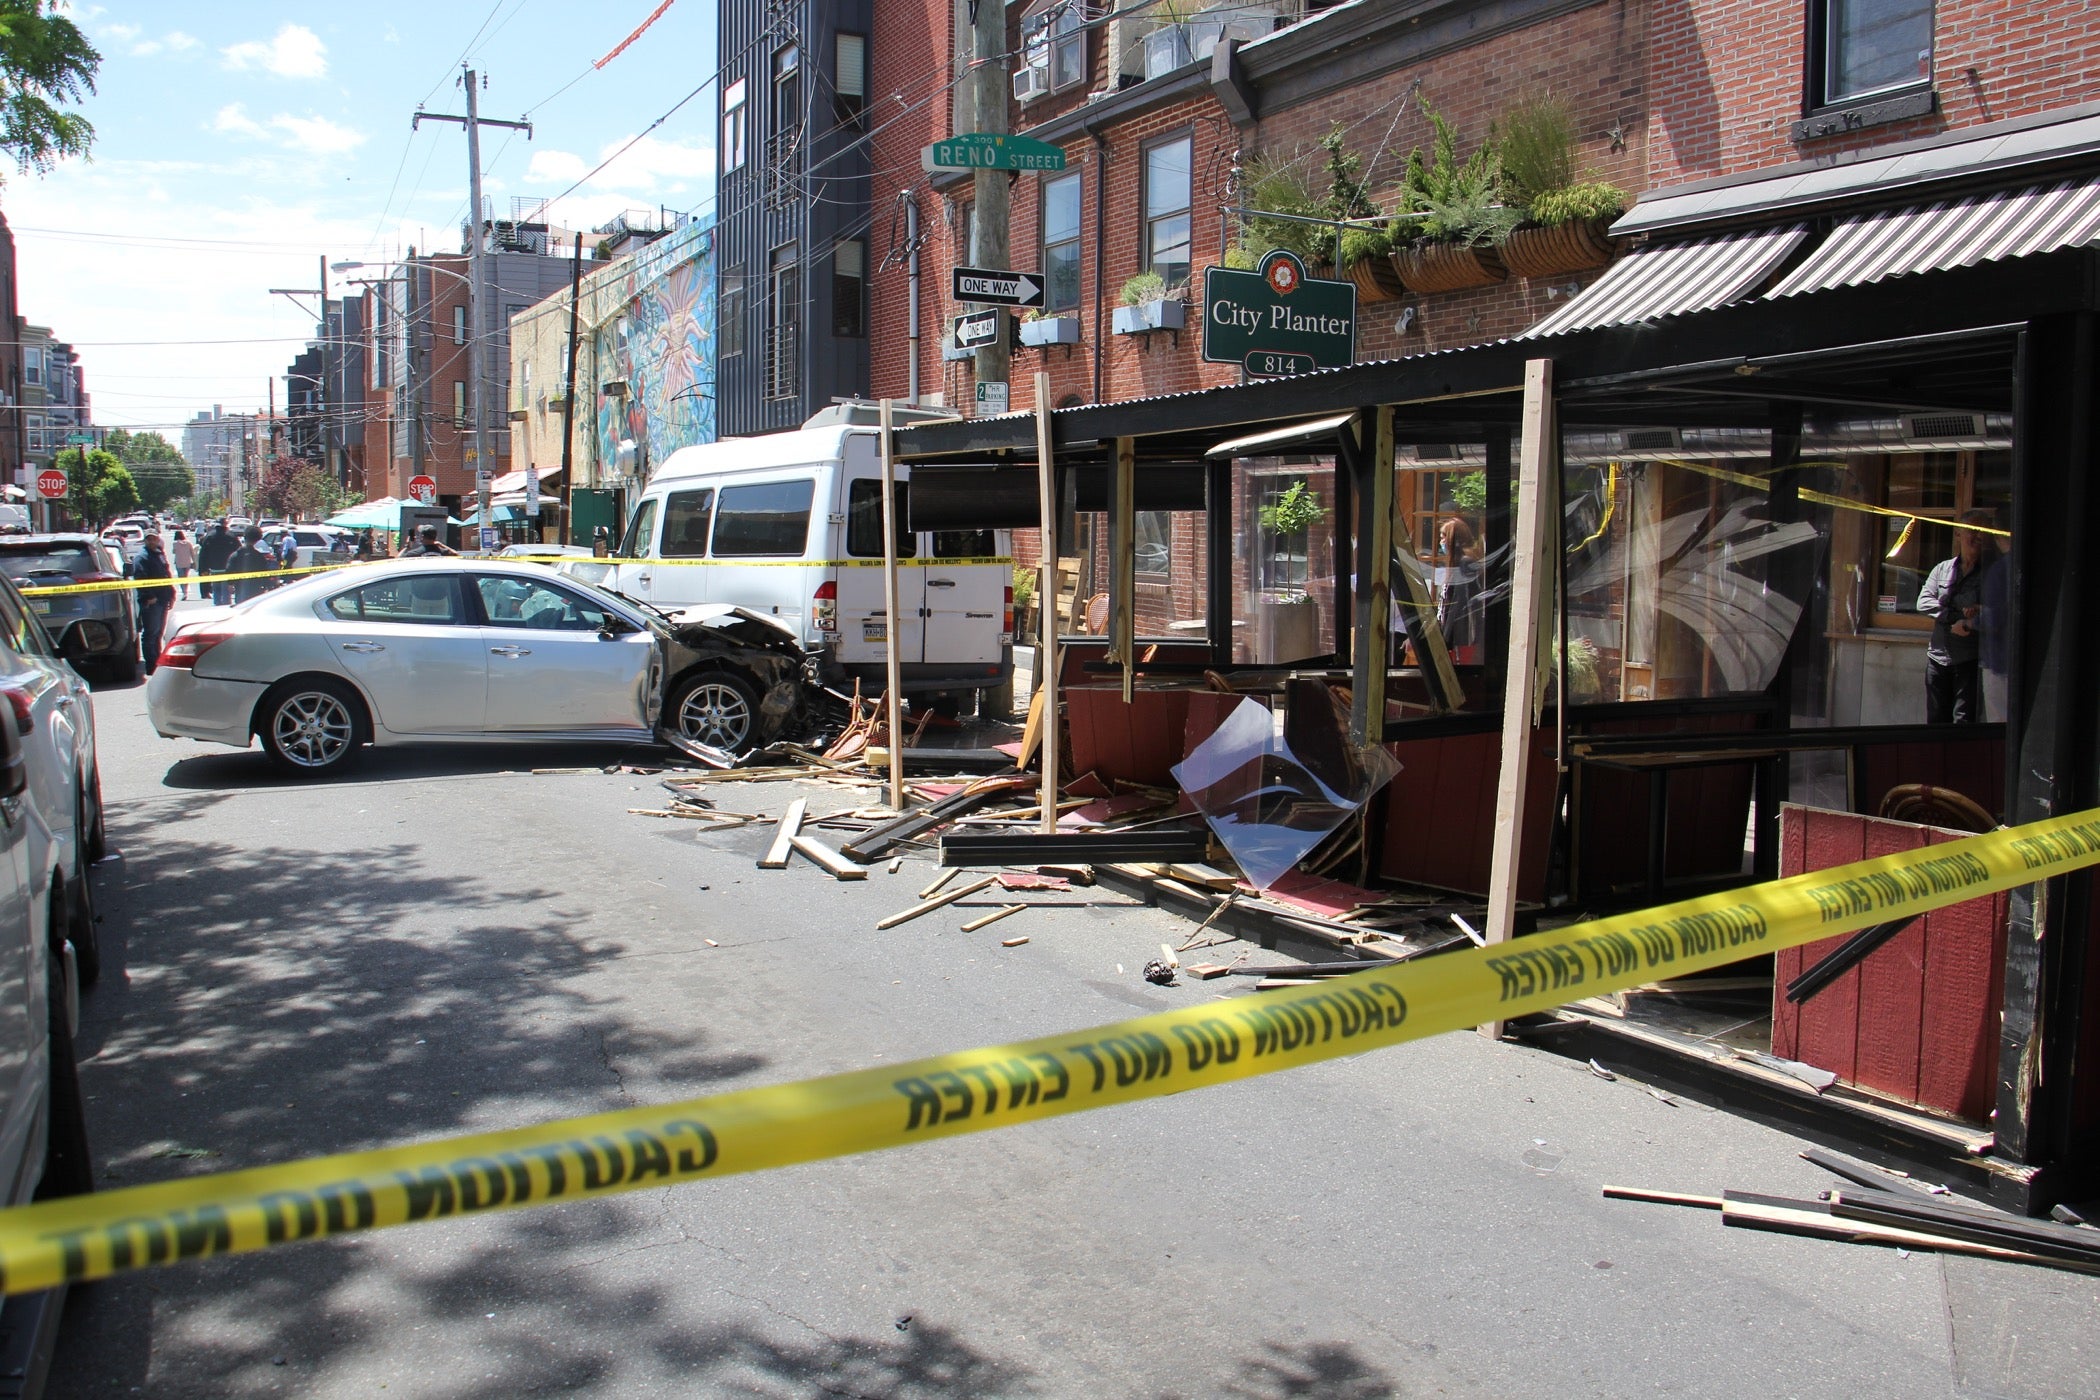 Fourth Street in Northern Liberties is closed to traffic while police investigate. A car tore the side off an outdoor dining structure before crashing into a parked van. Several patrons at Cafe La Maude were injured. (Emma Lee/WHYY)